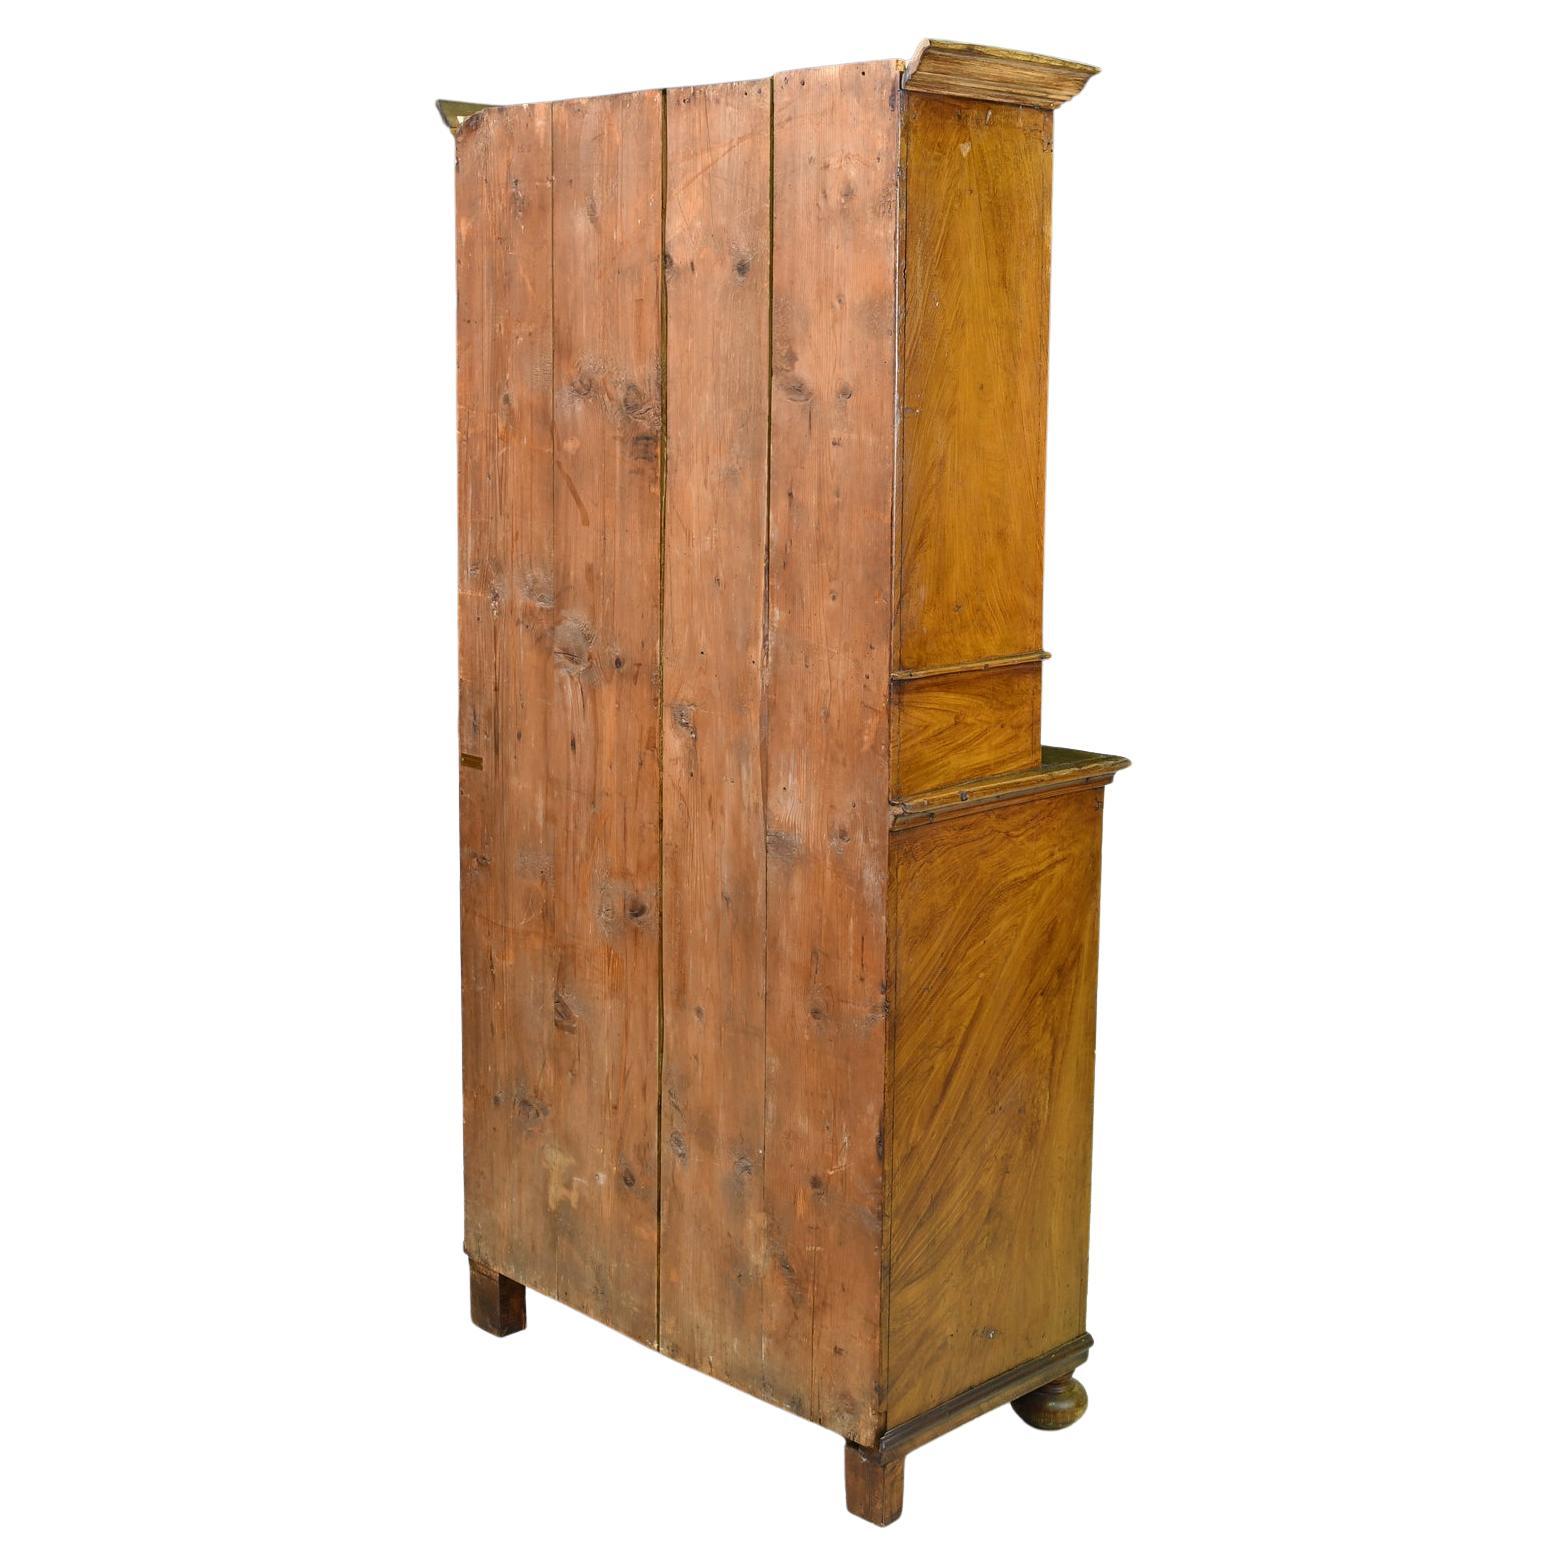 Antique Provincial Cupboard with Original Faux-Bois Painted Finish, c. 1830 In Good Condition For Sale In Miami, FL